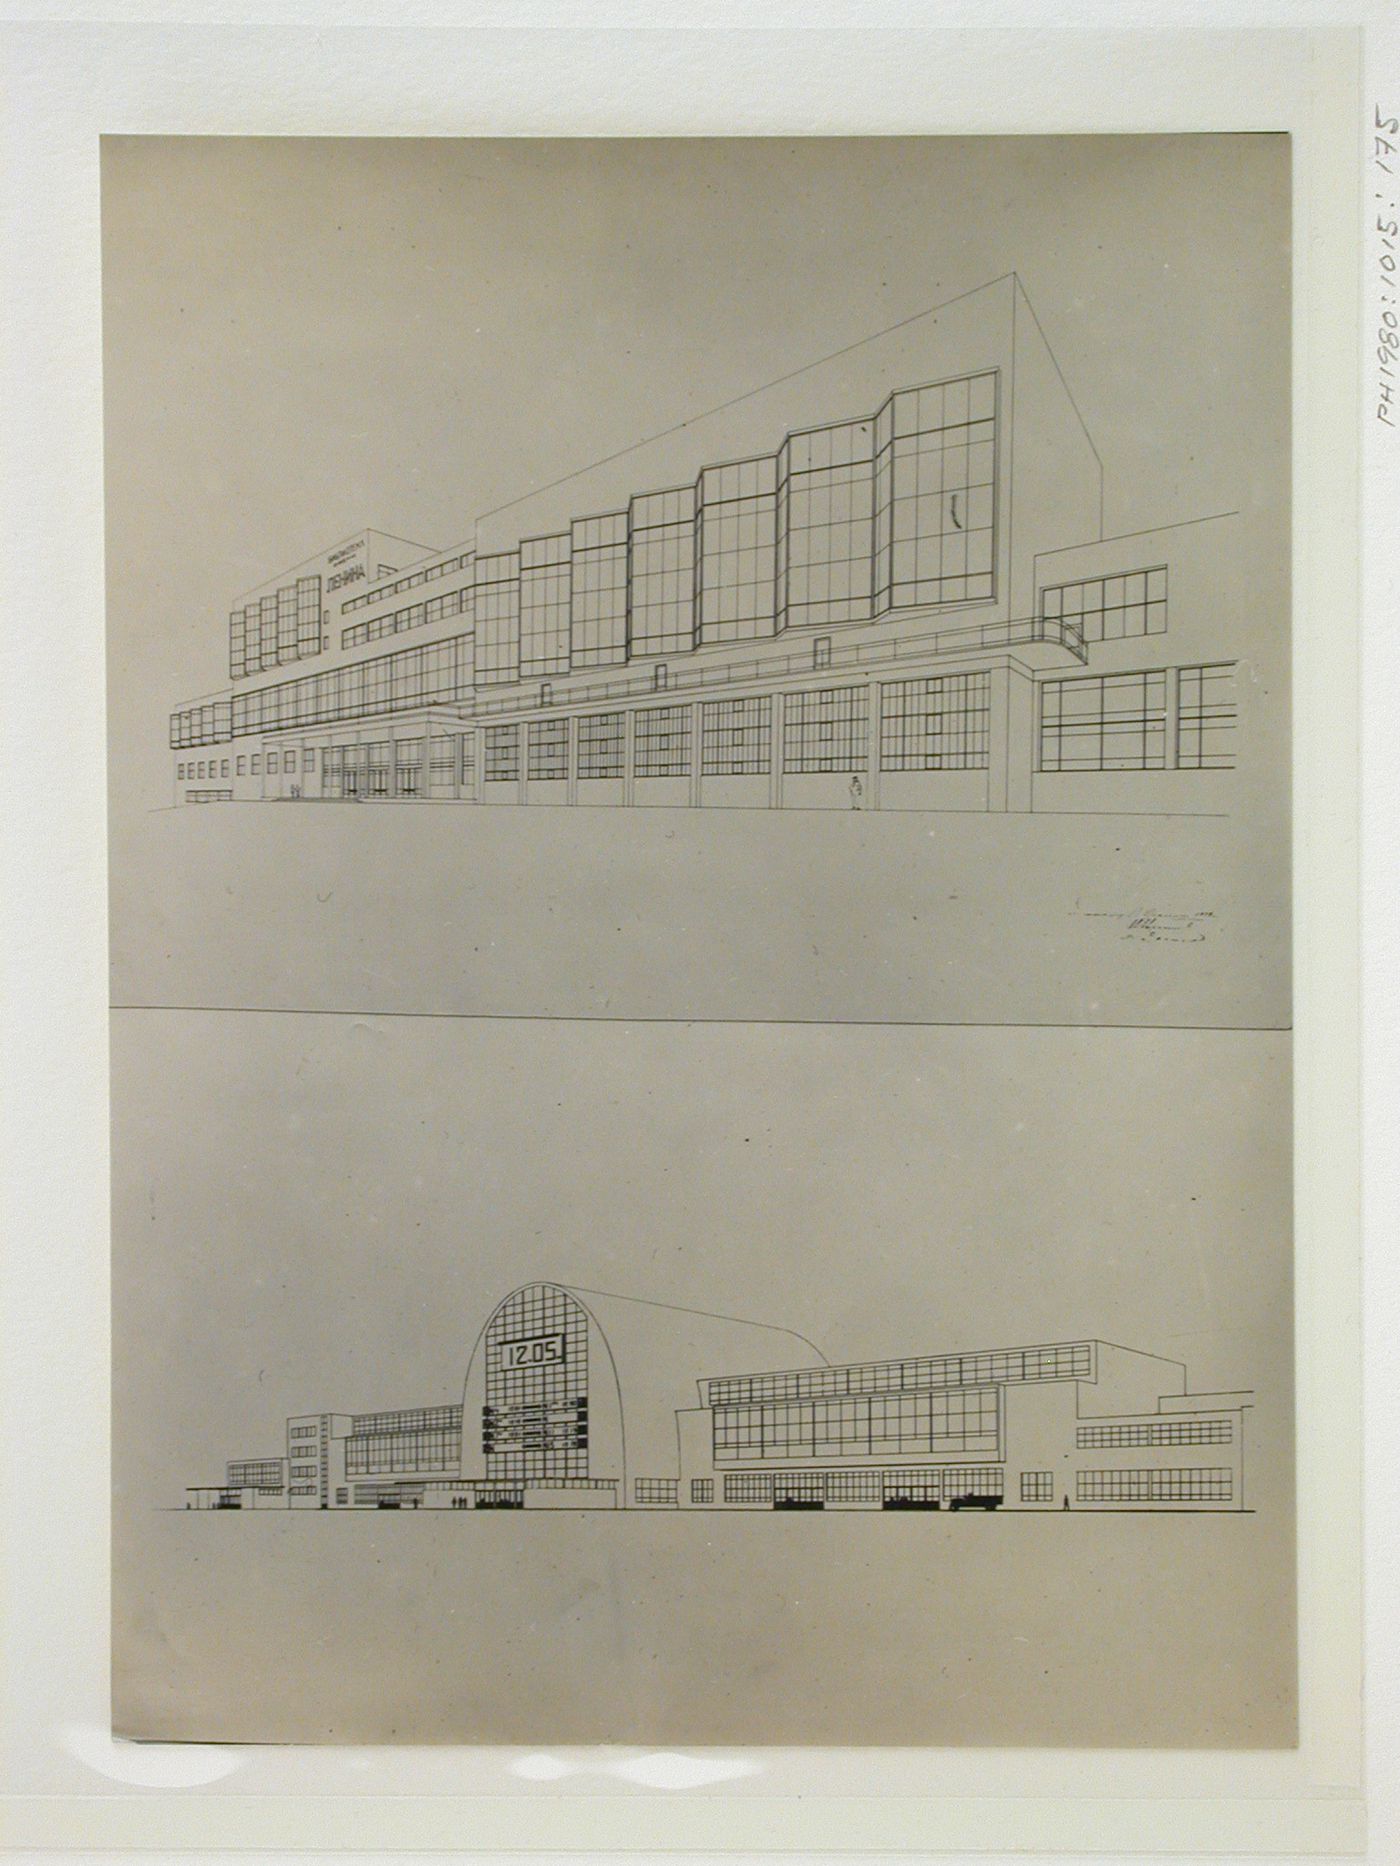 View of two elevation drawings for a train station in U.S.S.R. (now Russia)